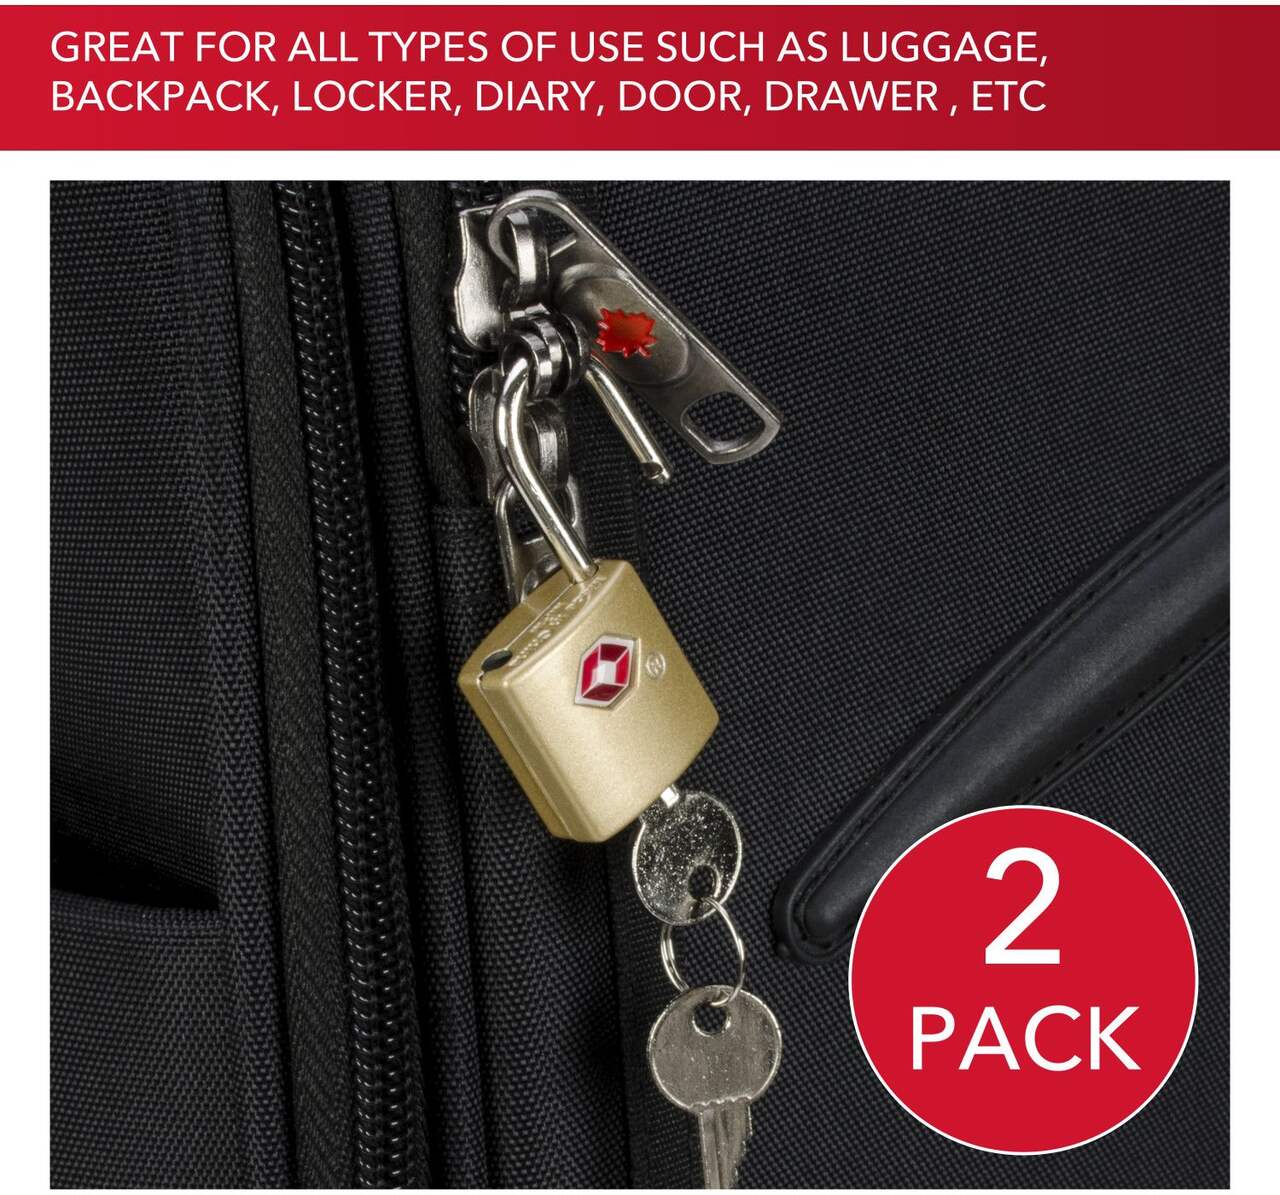 Keyless TSA Approved Luggage Lock with Lifetime Never Cut